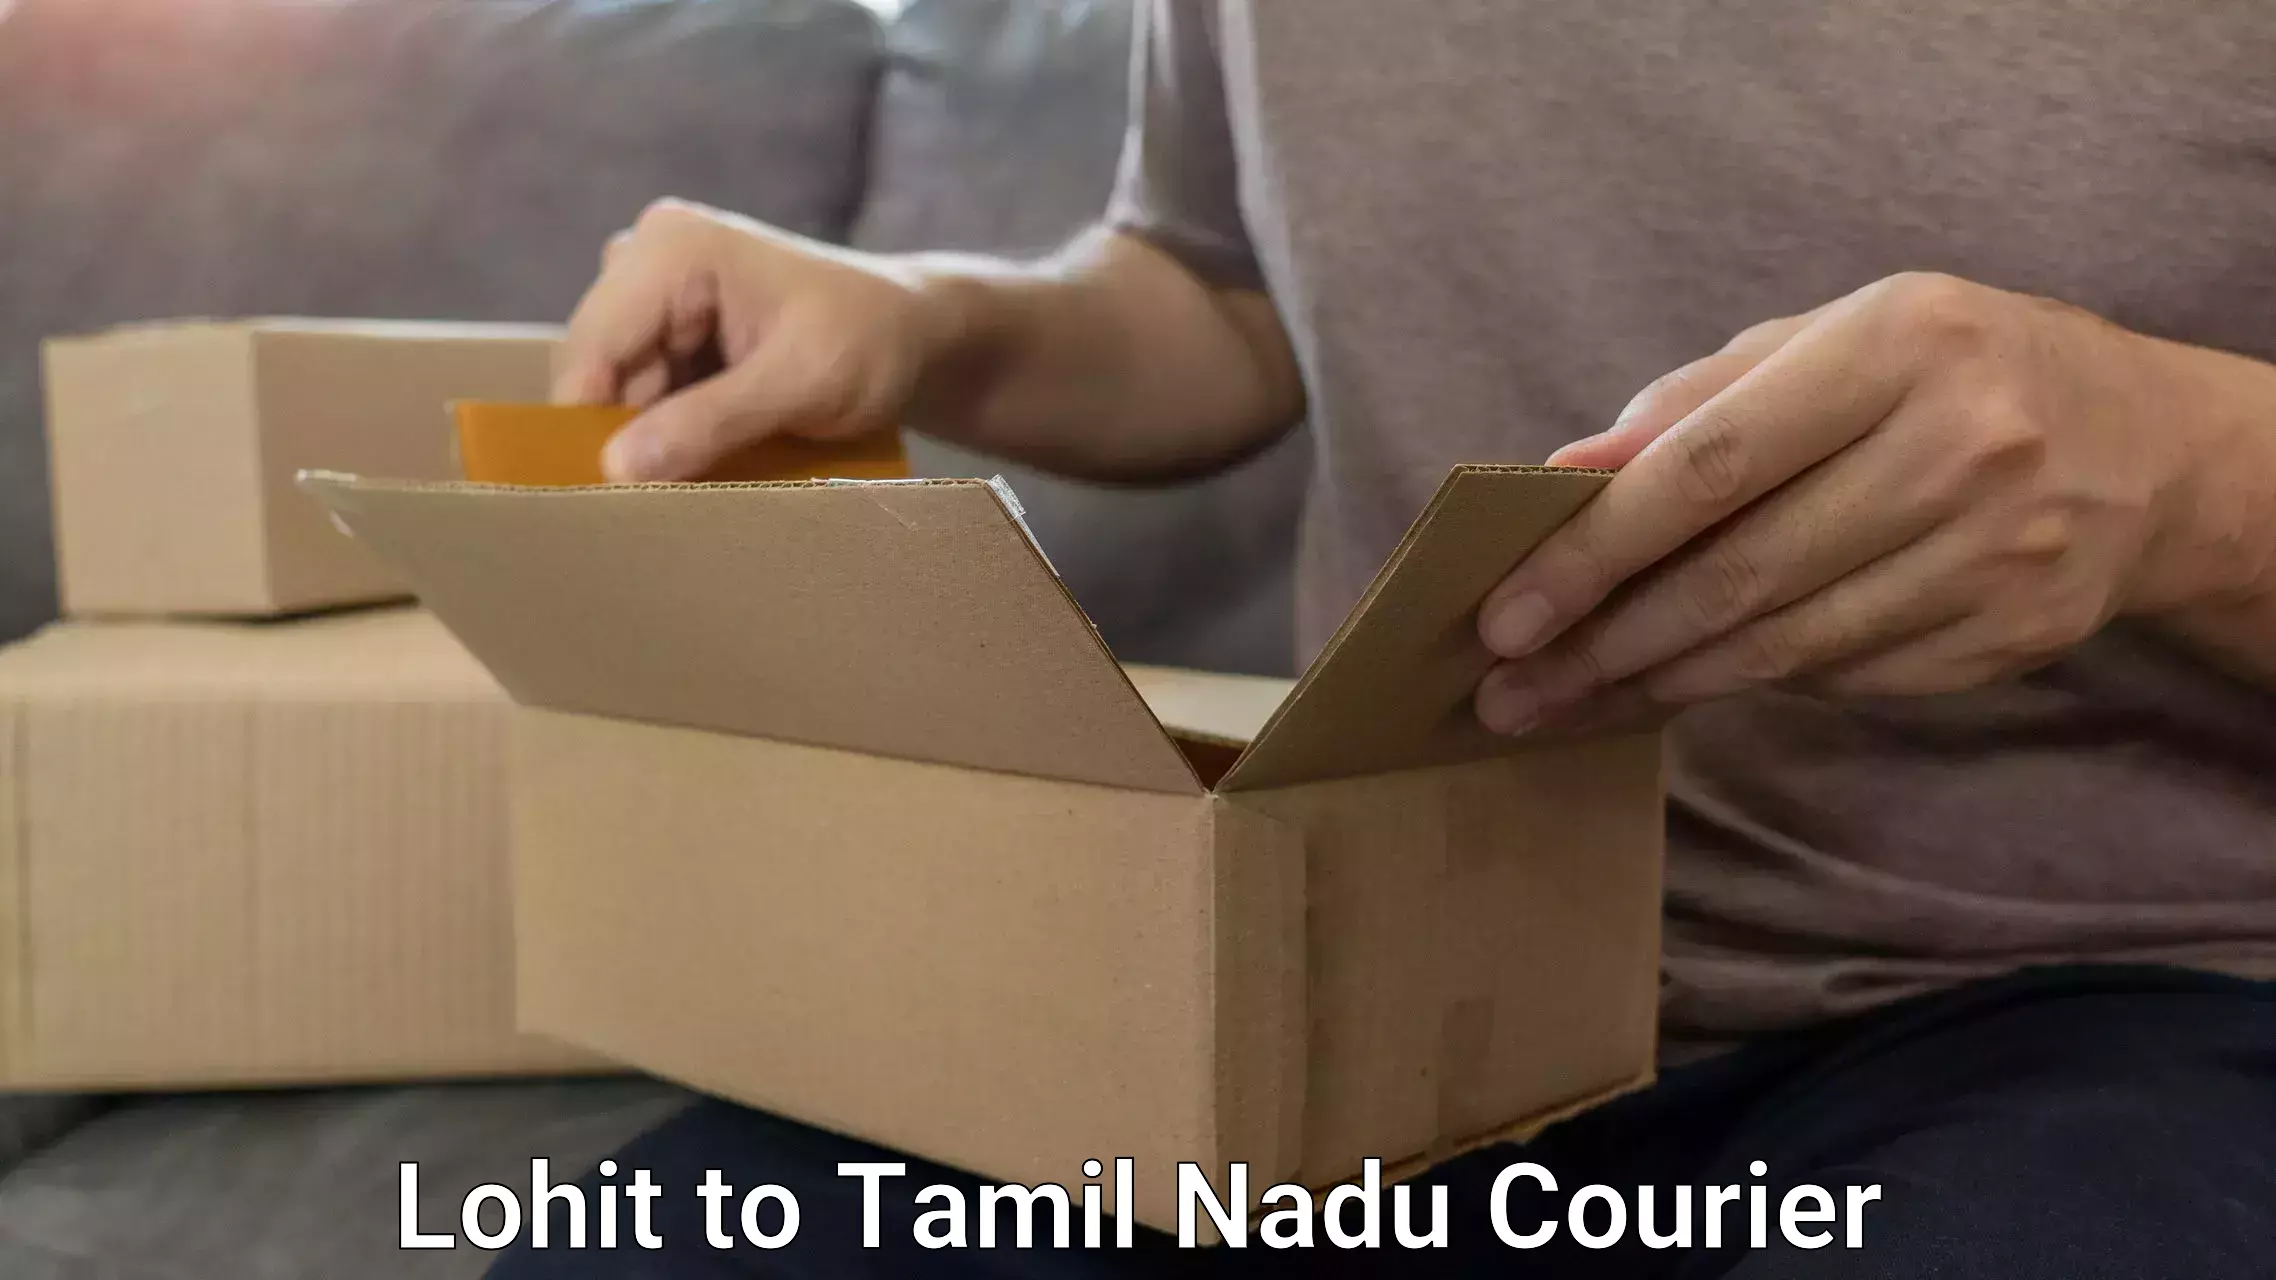 Luggage shipping service Lohit to Tamil Nadu Agricultural University Coimbatore